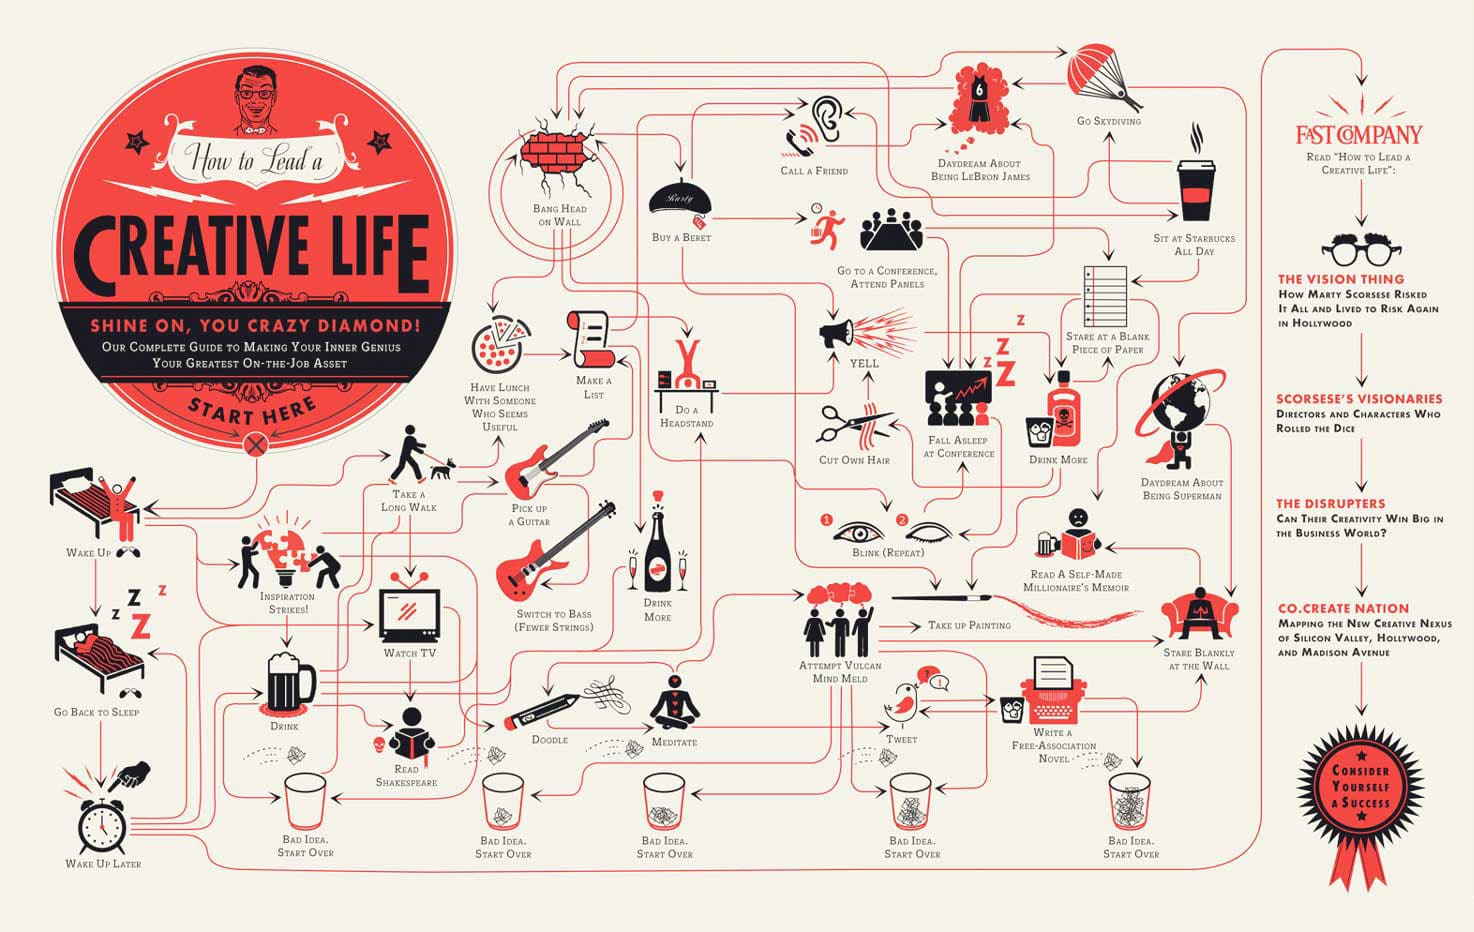 How To Live A Creative Life [Infographic]